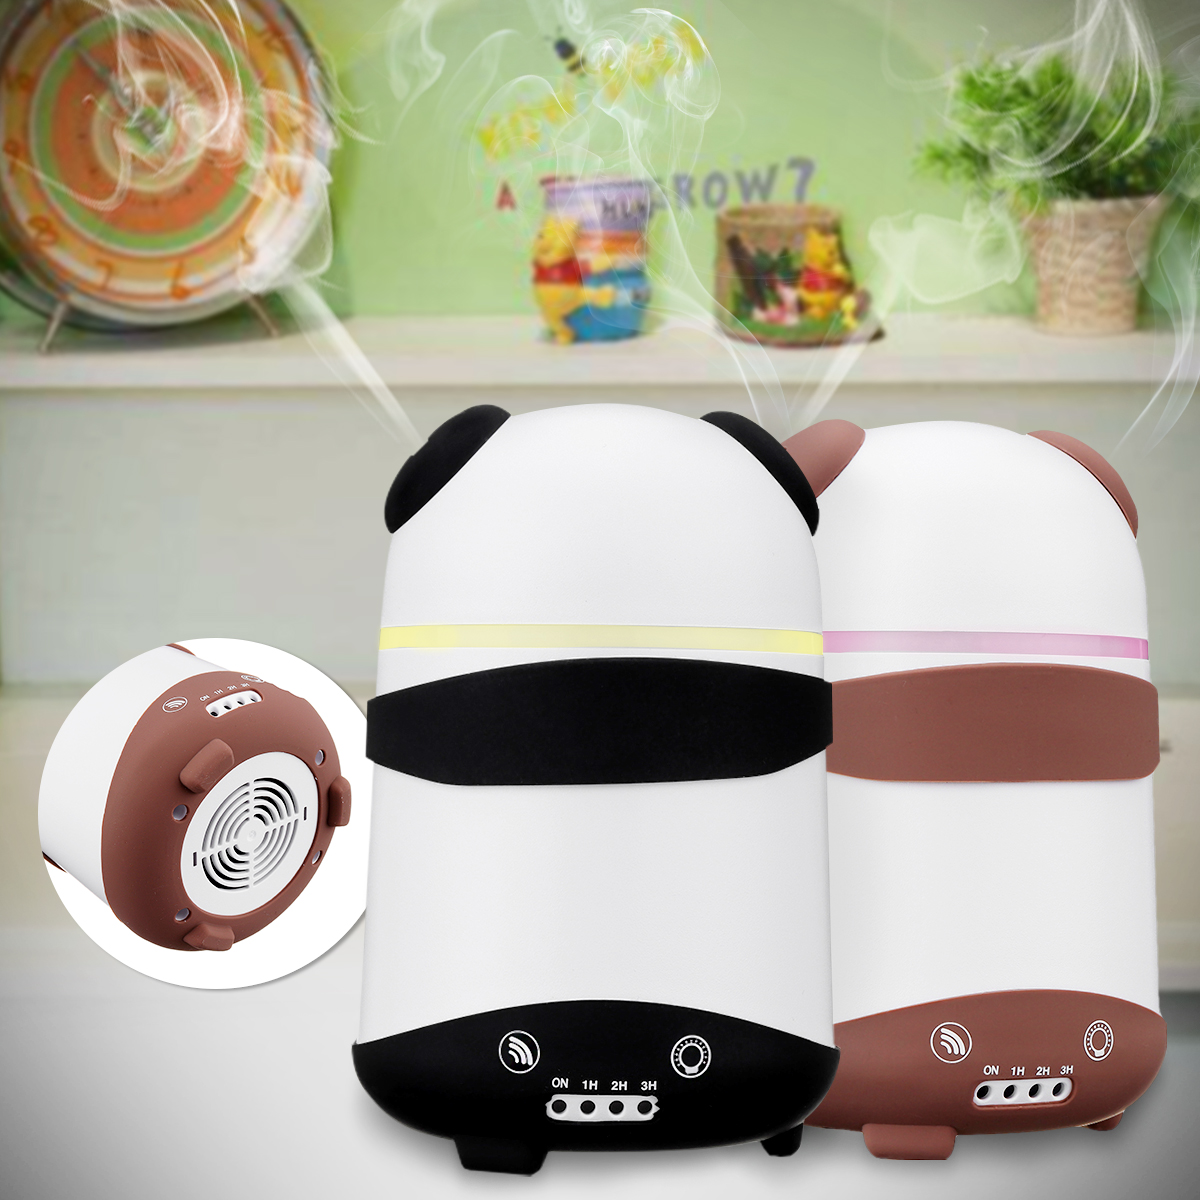 Dual-Humidifier-Air-Oil-Diffuser-Aroma-Mist-Maker-LED-Cartoon-Panda-Style-For-Home-Office-US-Plug-1376138-1